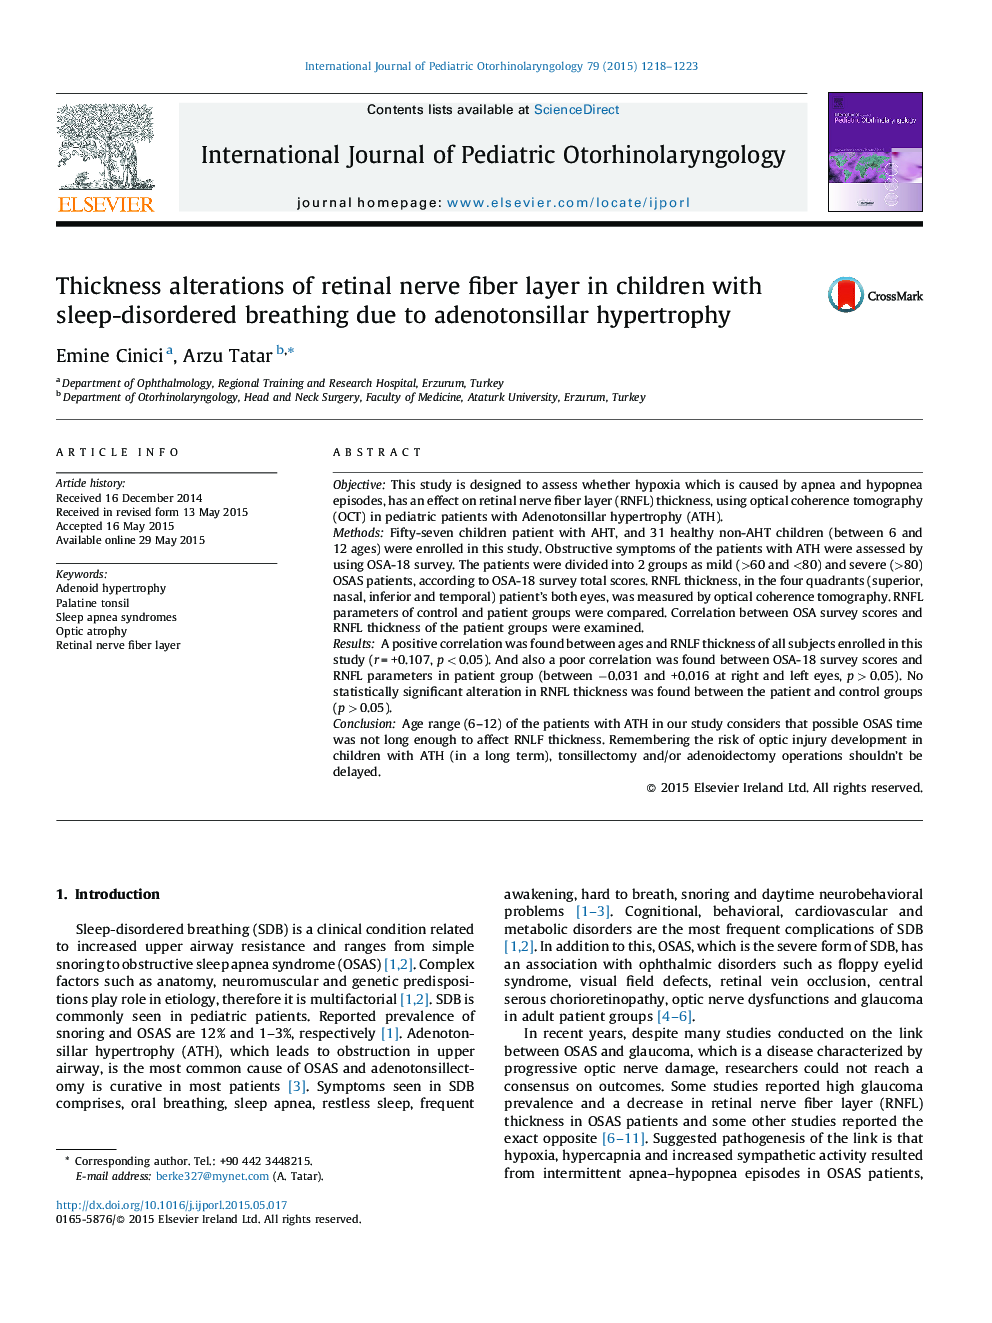 Thickness alterations of retinal nerve fiber layer in children with sleep-disordered breathing due to adenotonsillar hypertrophy